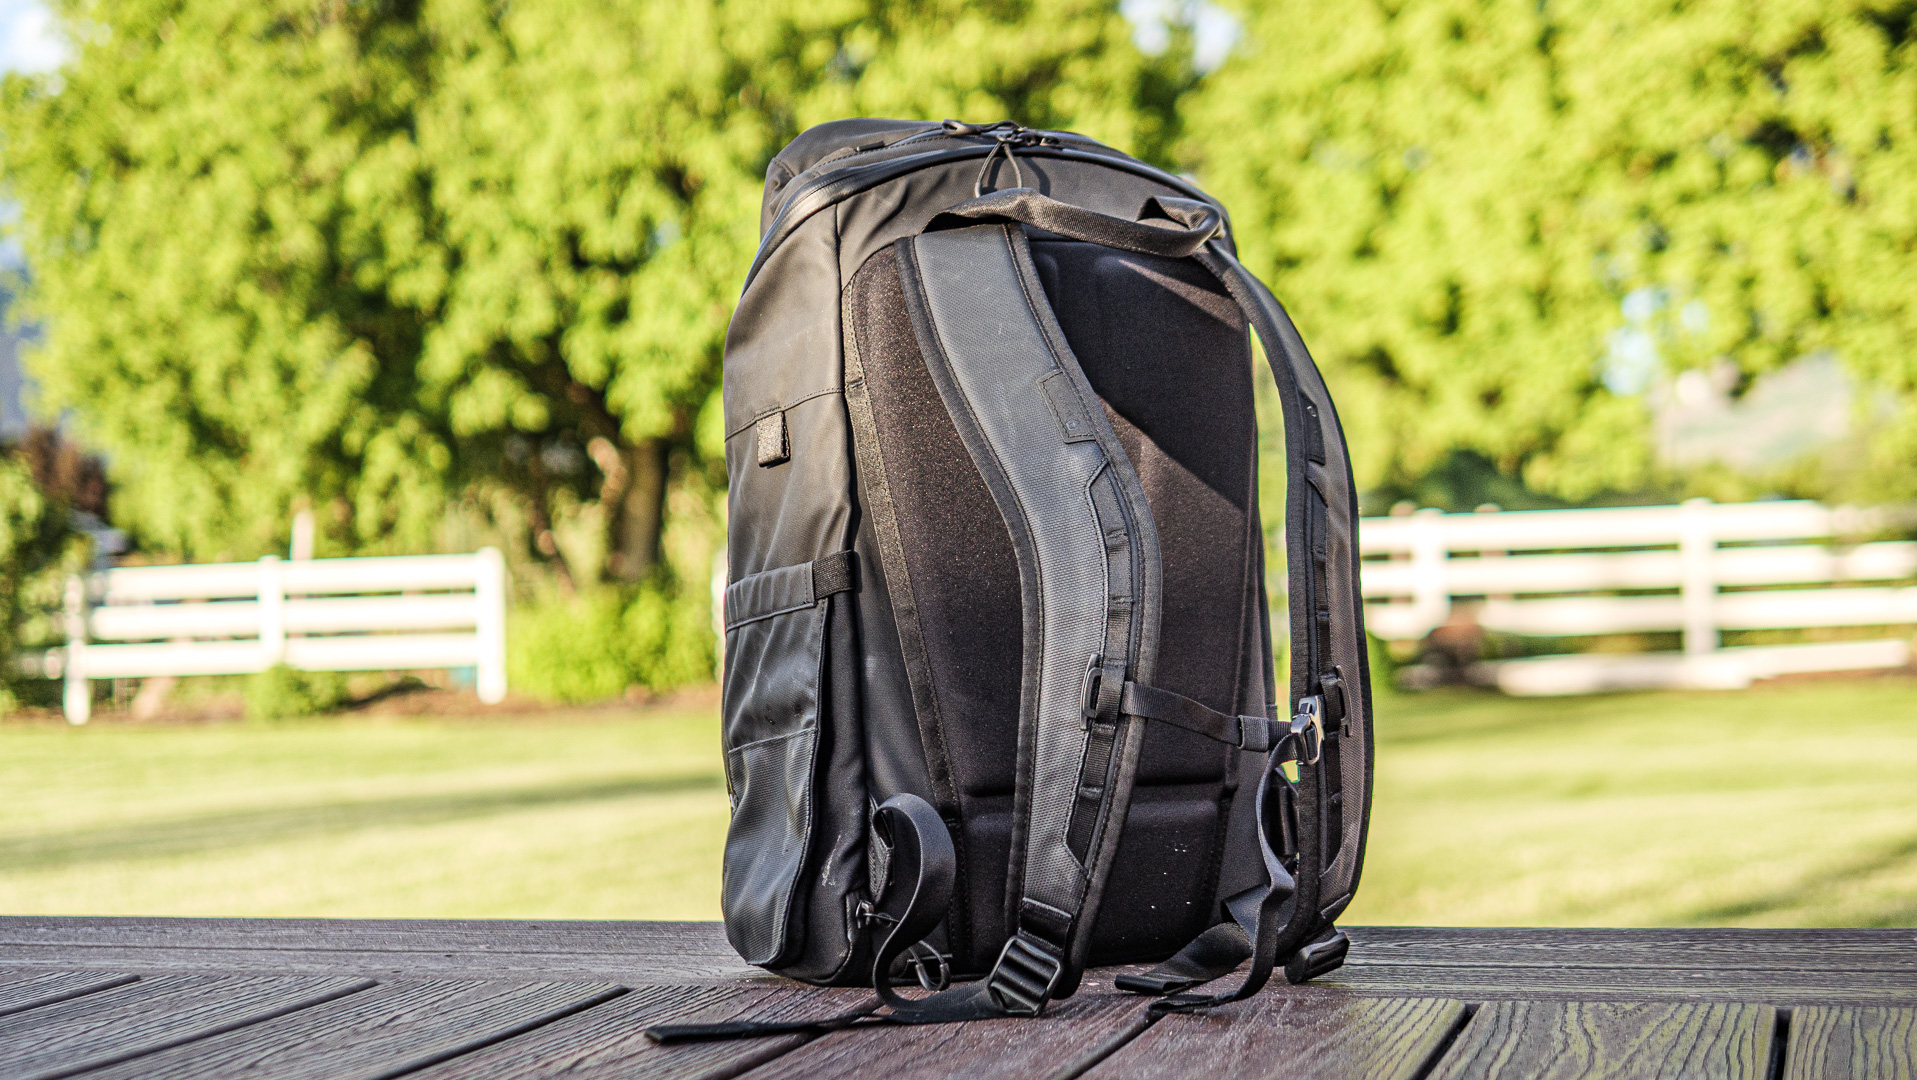 DUO Daypack by WANDRD provides tough, customizable storage 